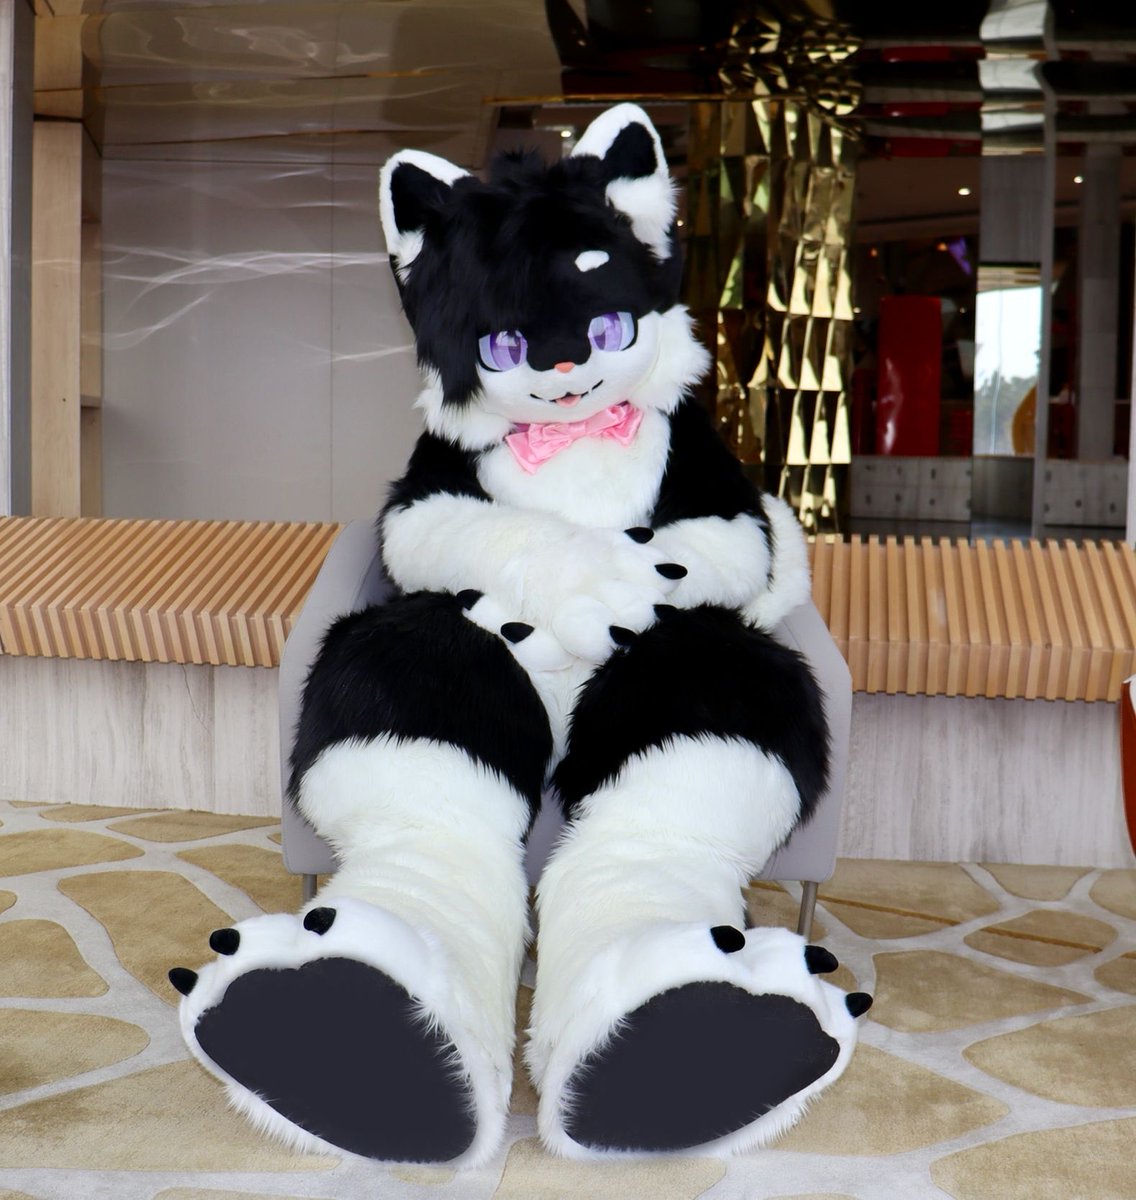 Oh yea confuzzled is 2 weeks away. Huh. 

I'll be that Oreo cat walking around  :>